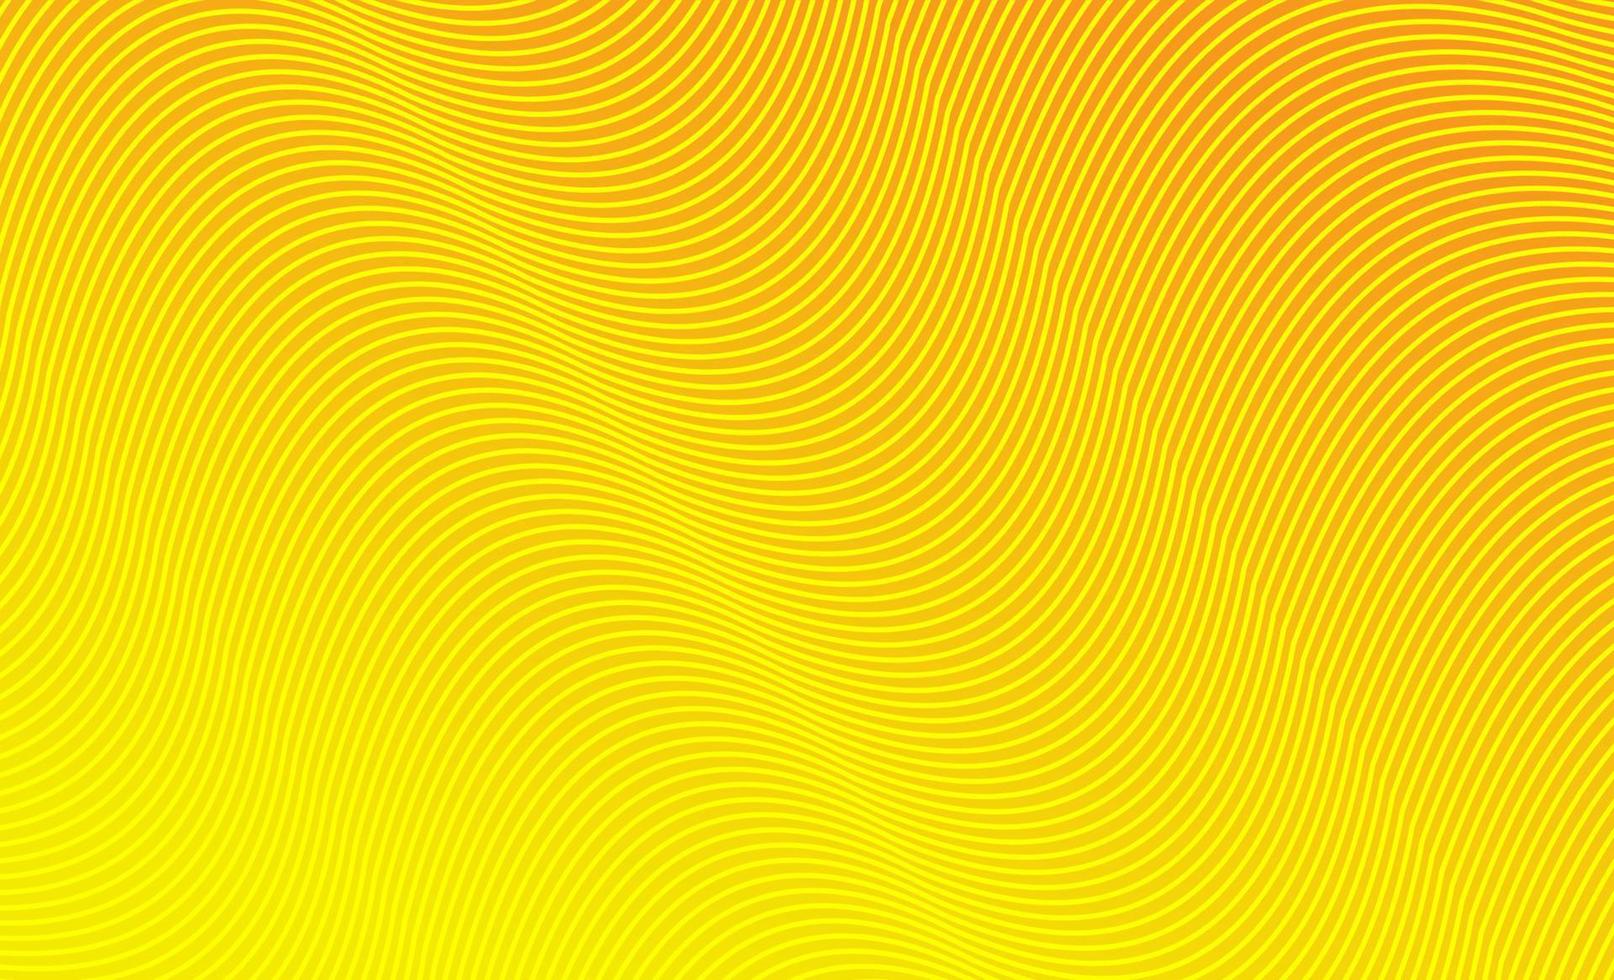 abstract yellow background with wavy line vector